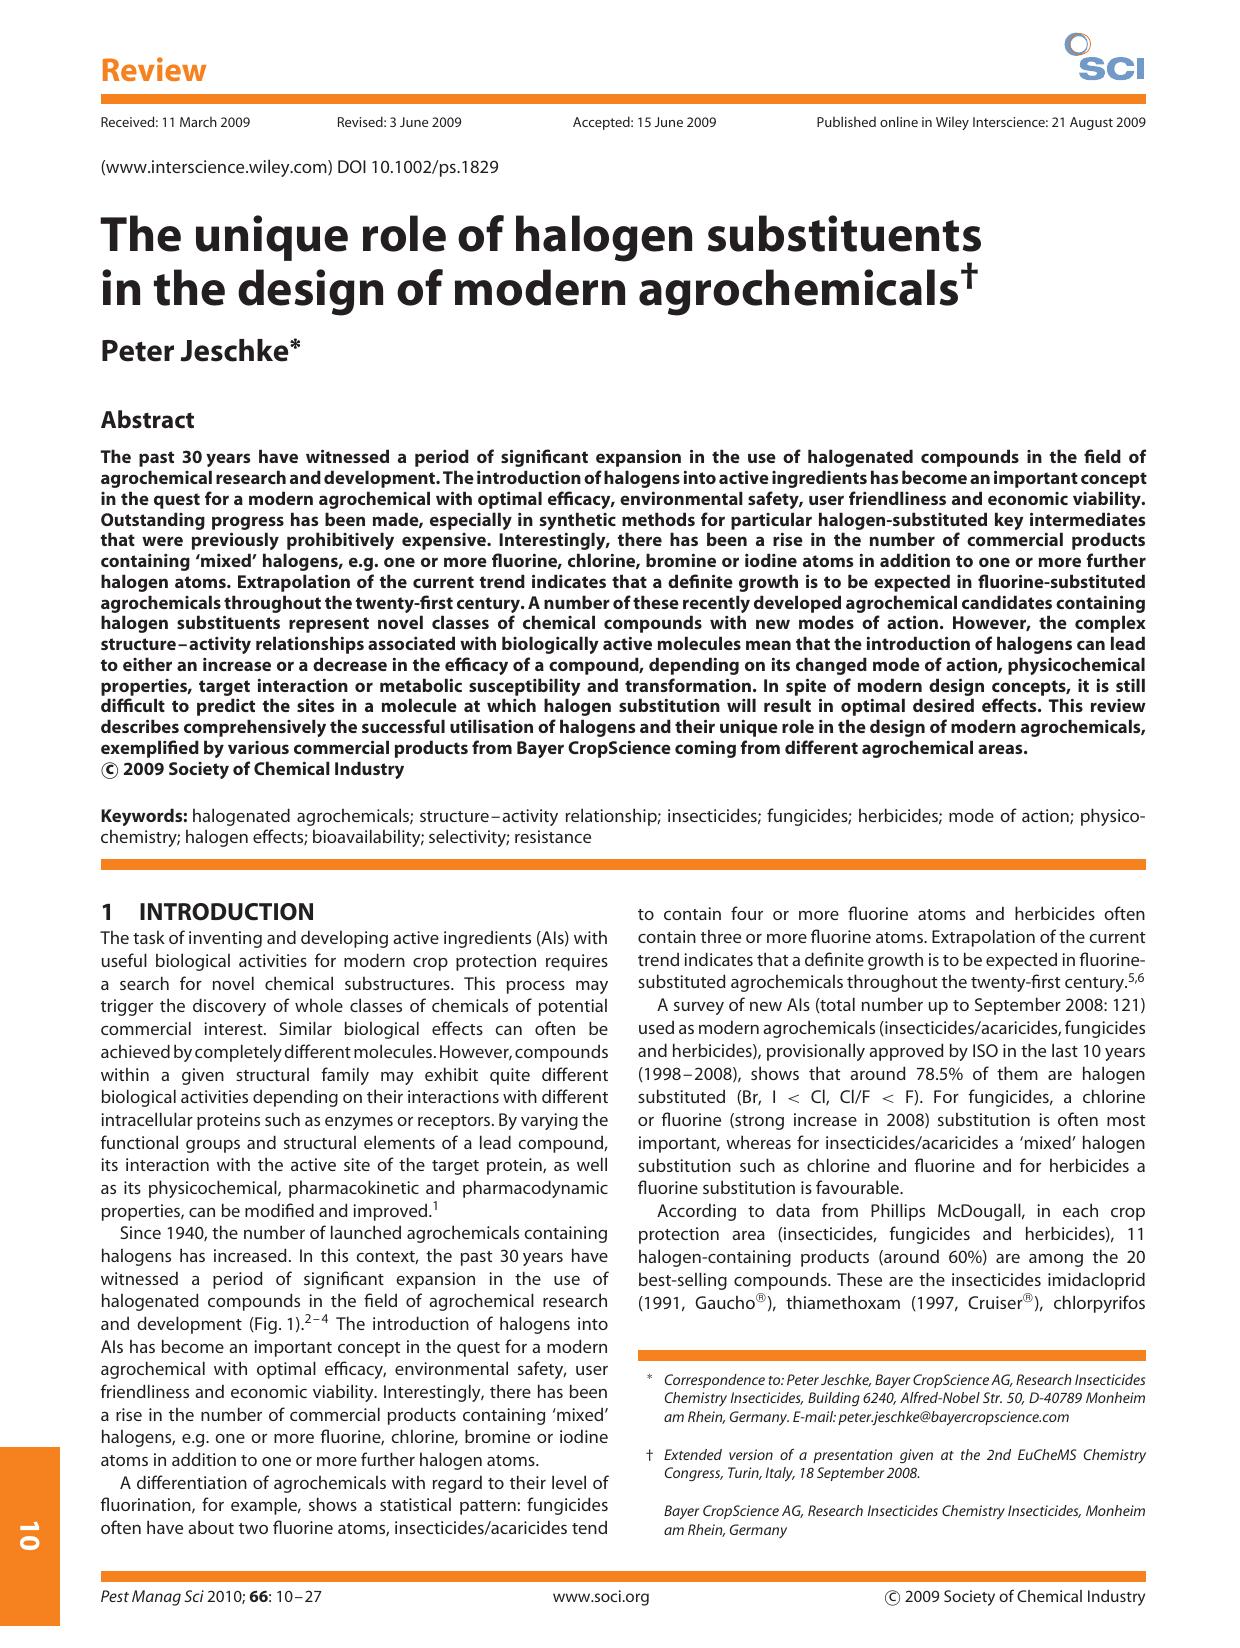 The unique role of halogen substituents in the design of modern agrochemicals by Unknown